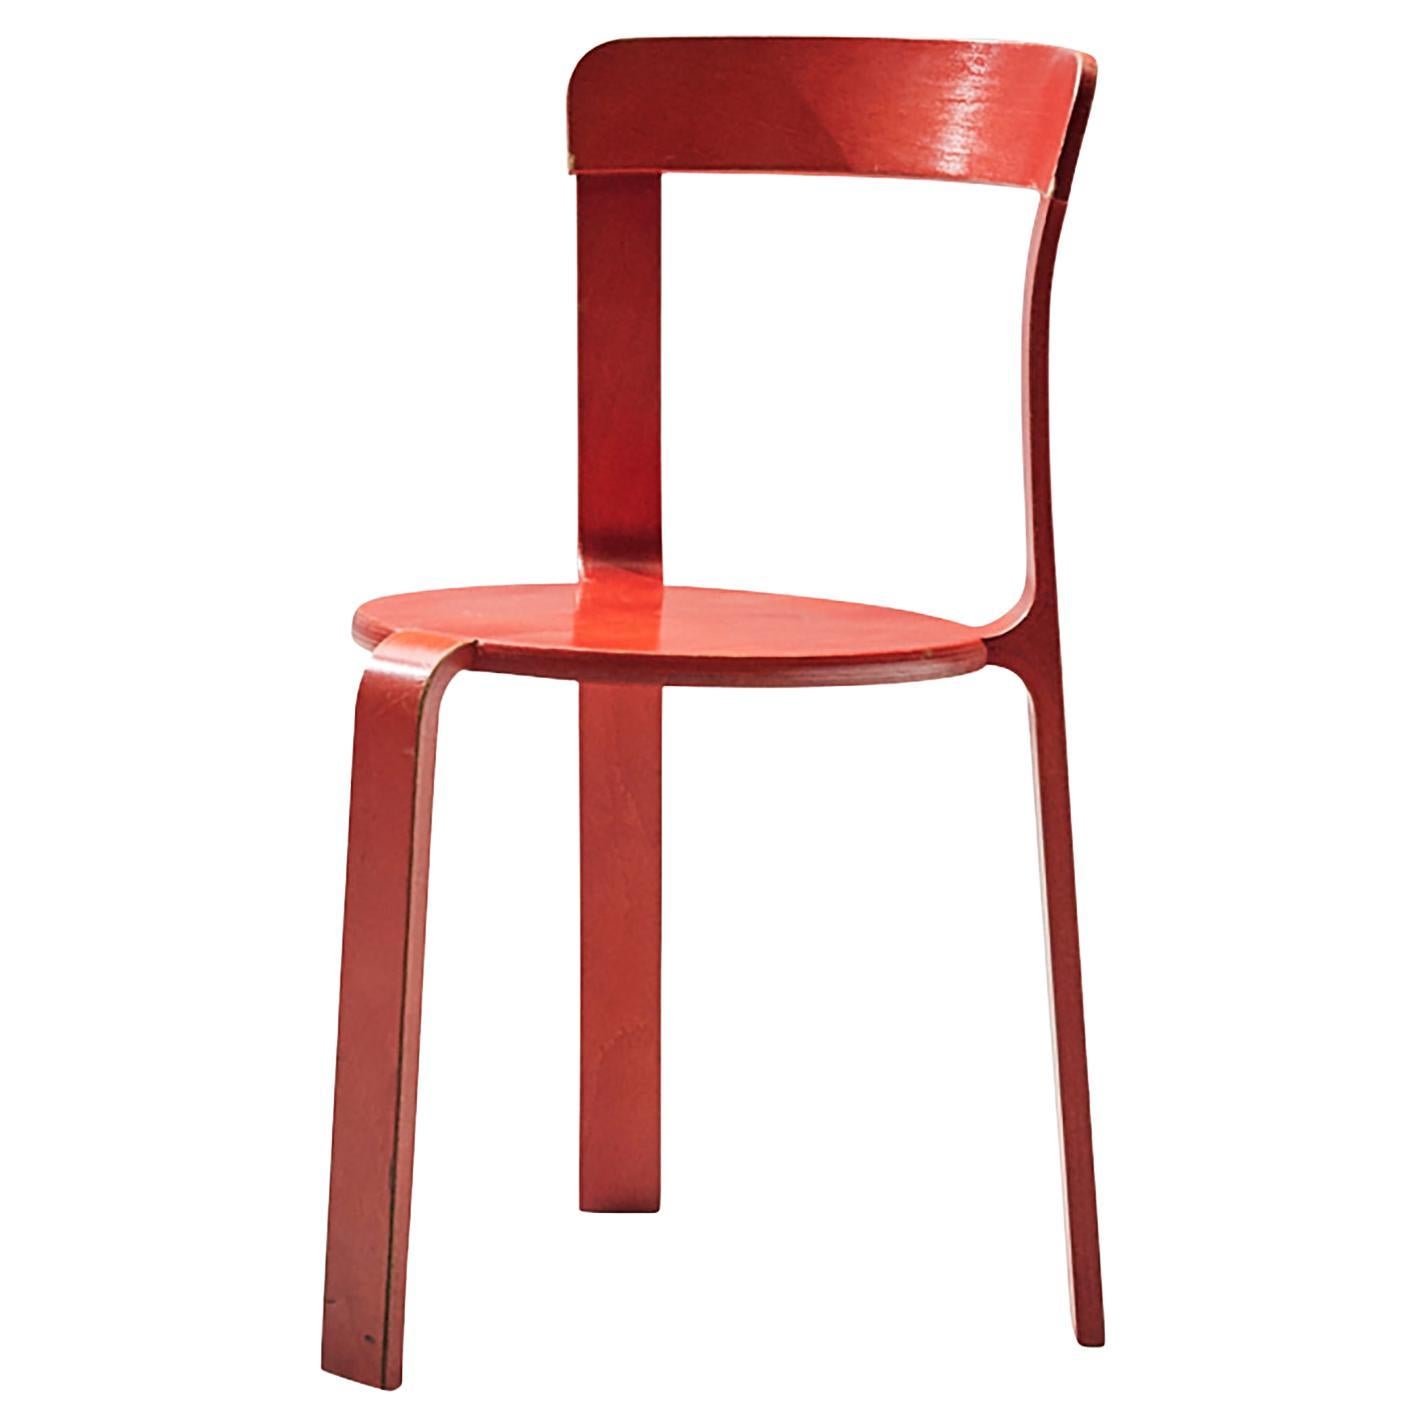 Bruno Rey for Dietiker Chair in Red Plywood